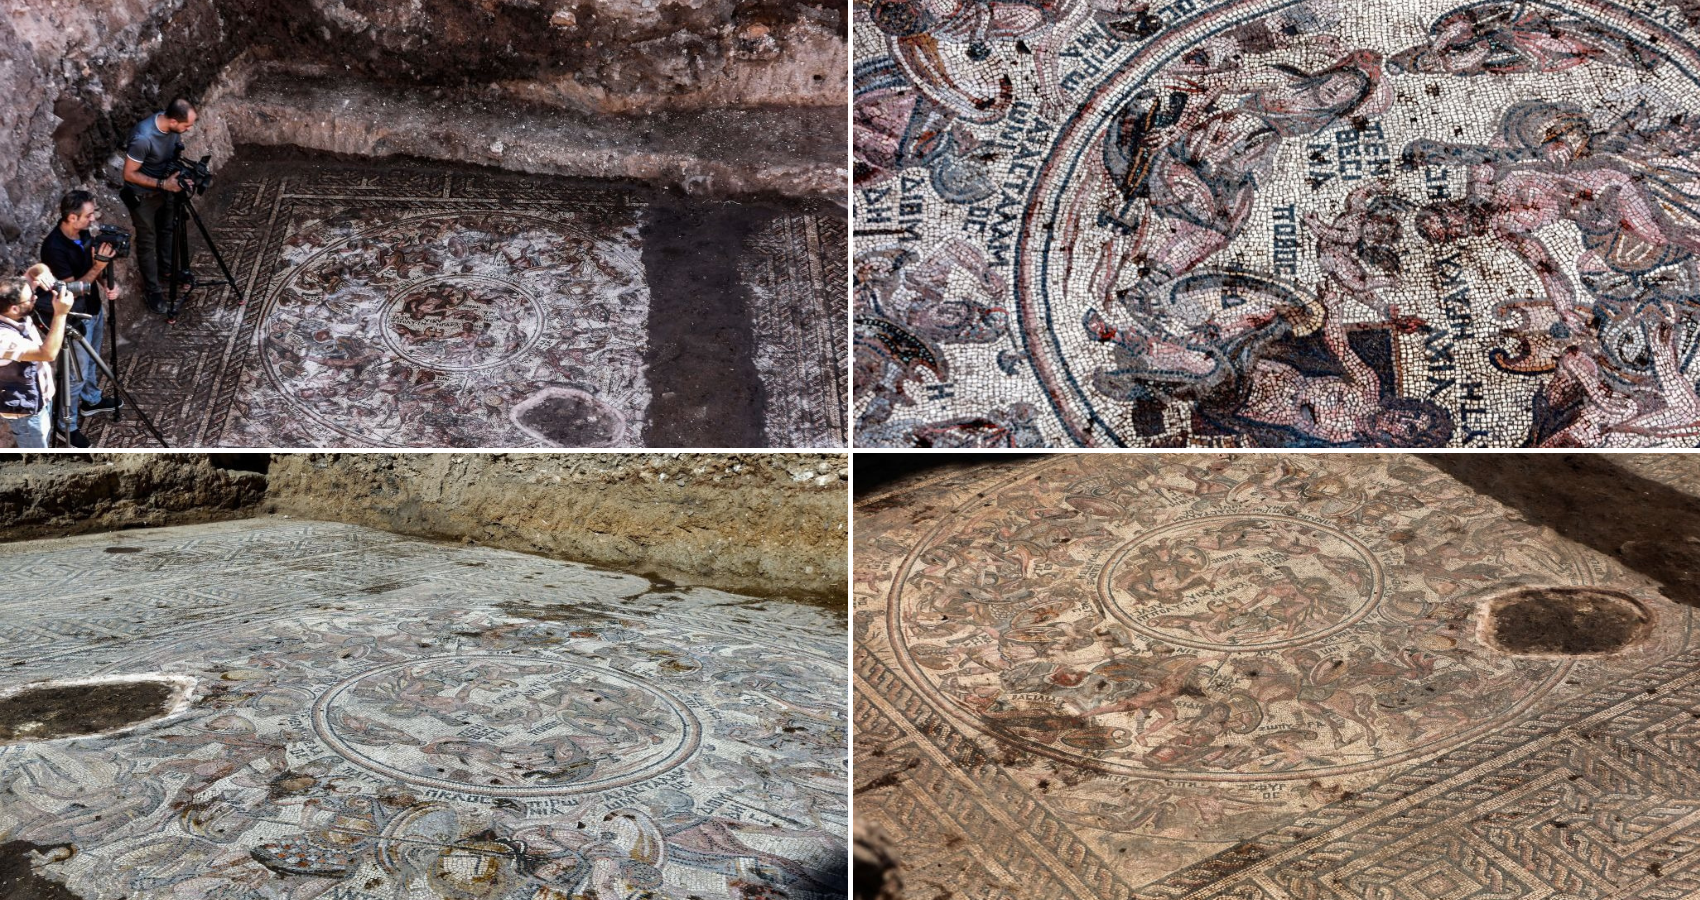 Archaeologists Have Found an Ancient Roman Mosaic in Syria That Miraculously Survived Rampant Looting and a Civil War